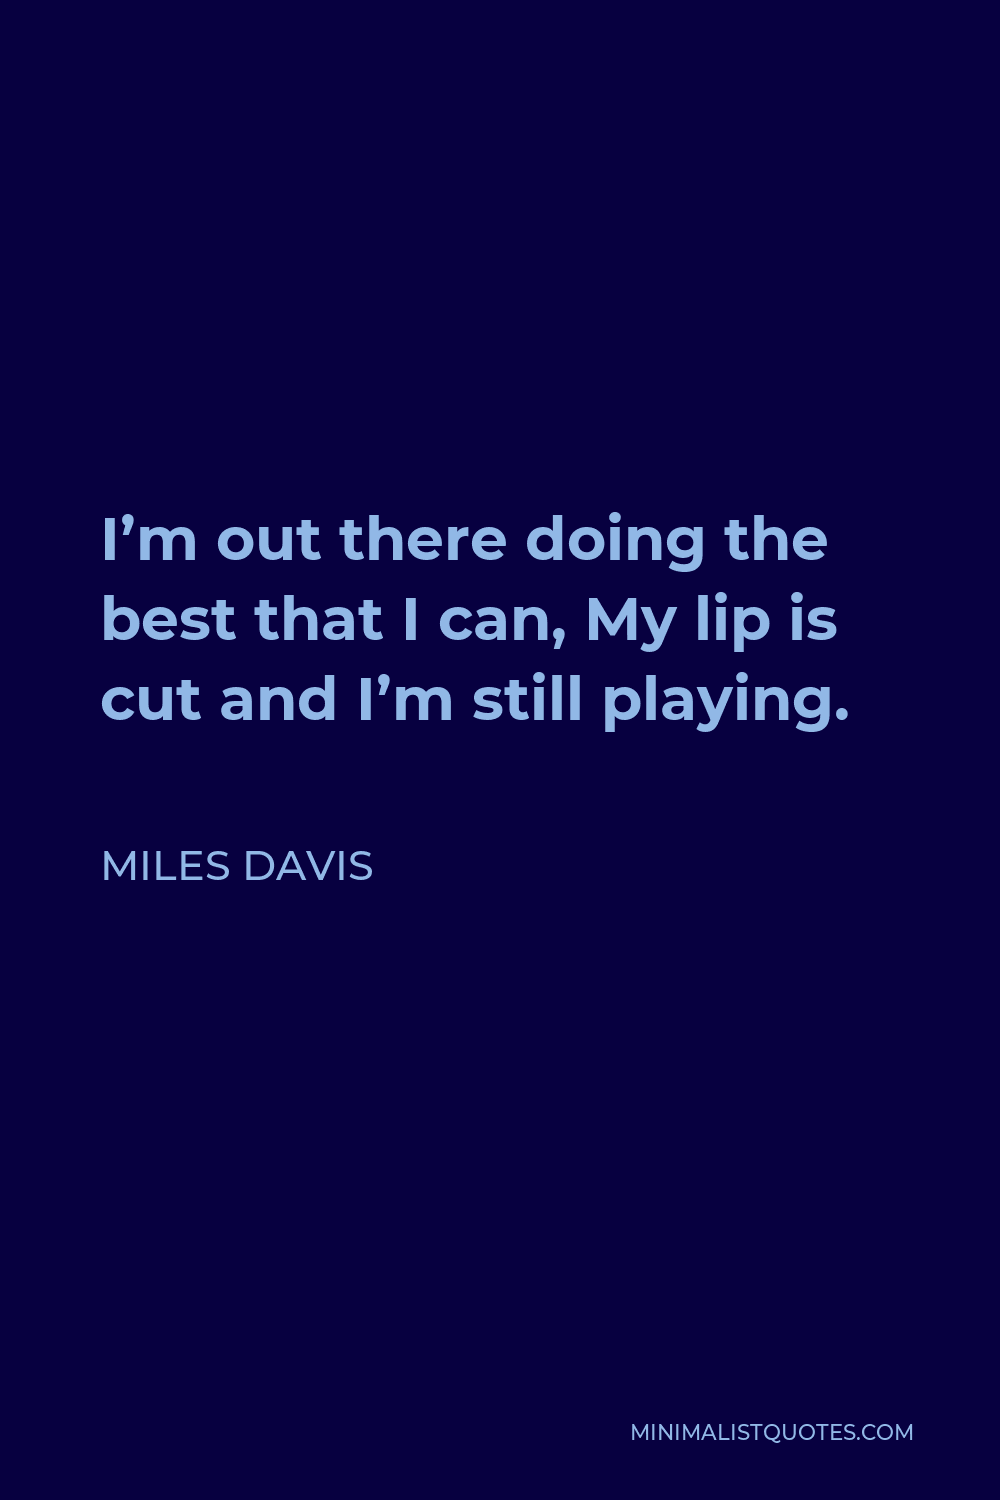 Miles Davis Quote - I’m out there doing the best that I can, My lip is cut and I’m still playing.